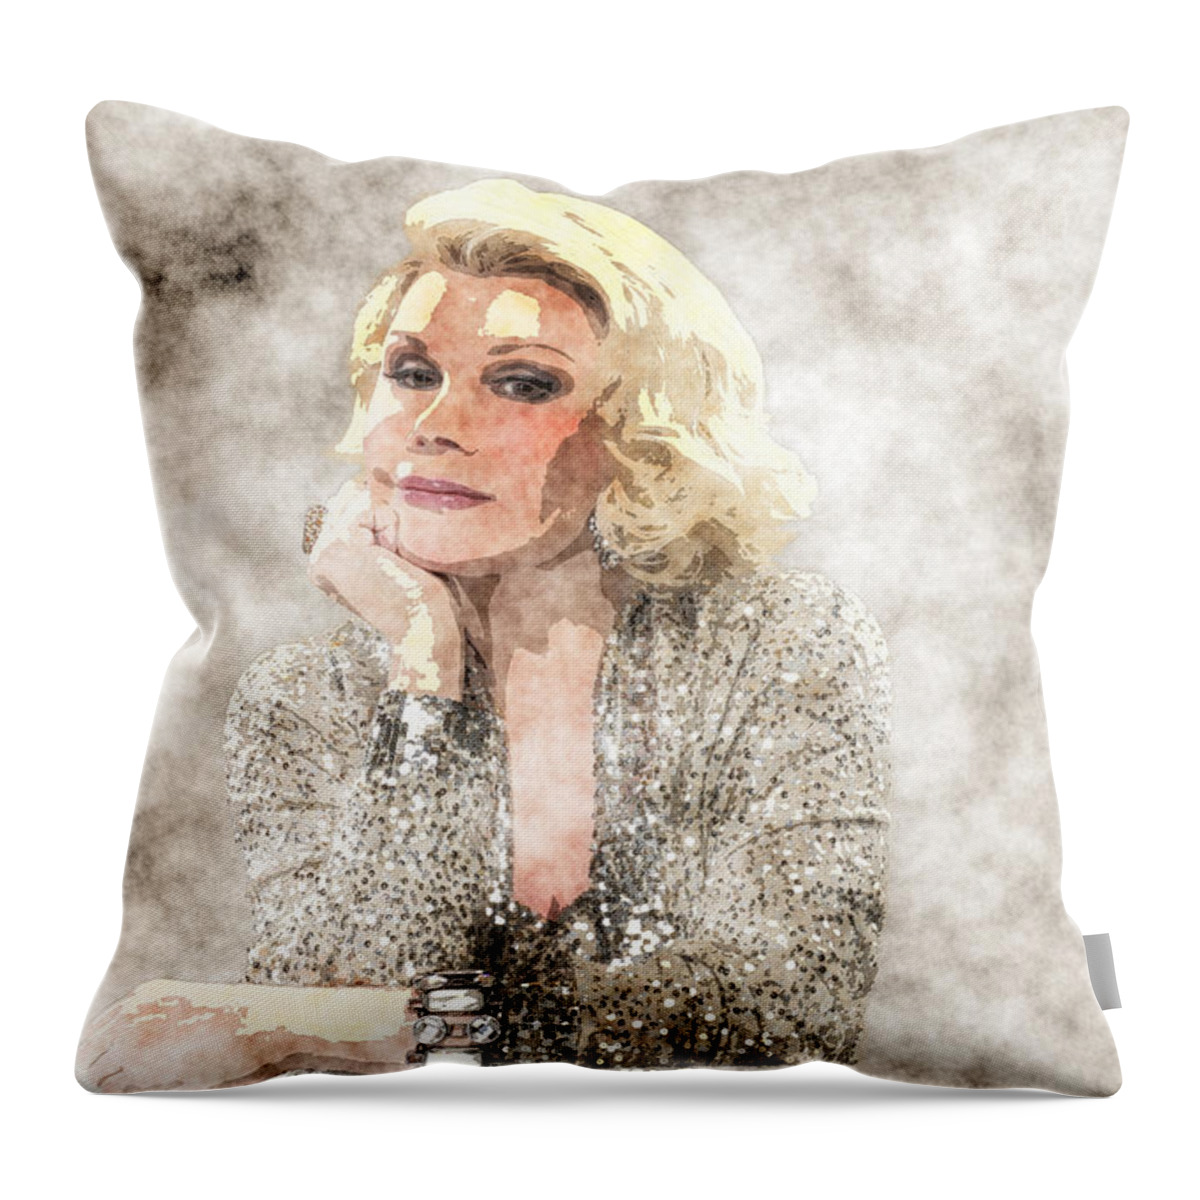 Joan Rivers Portrait Throw Pillow featuring the painting Joan Rivers Portrait #1 by MotionAge Designs